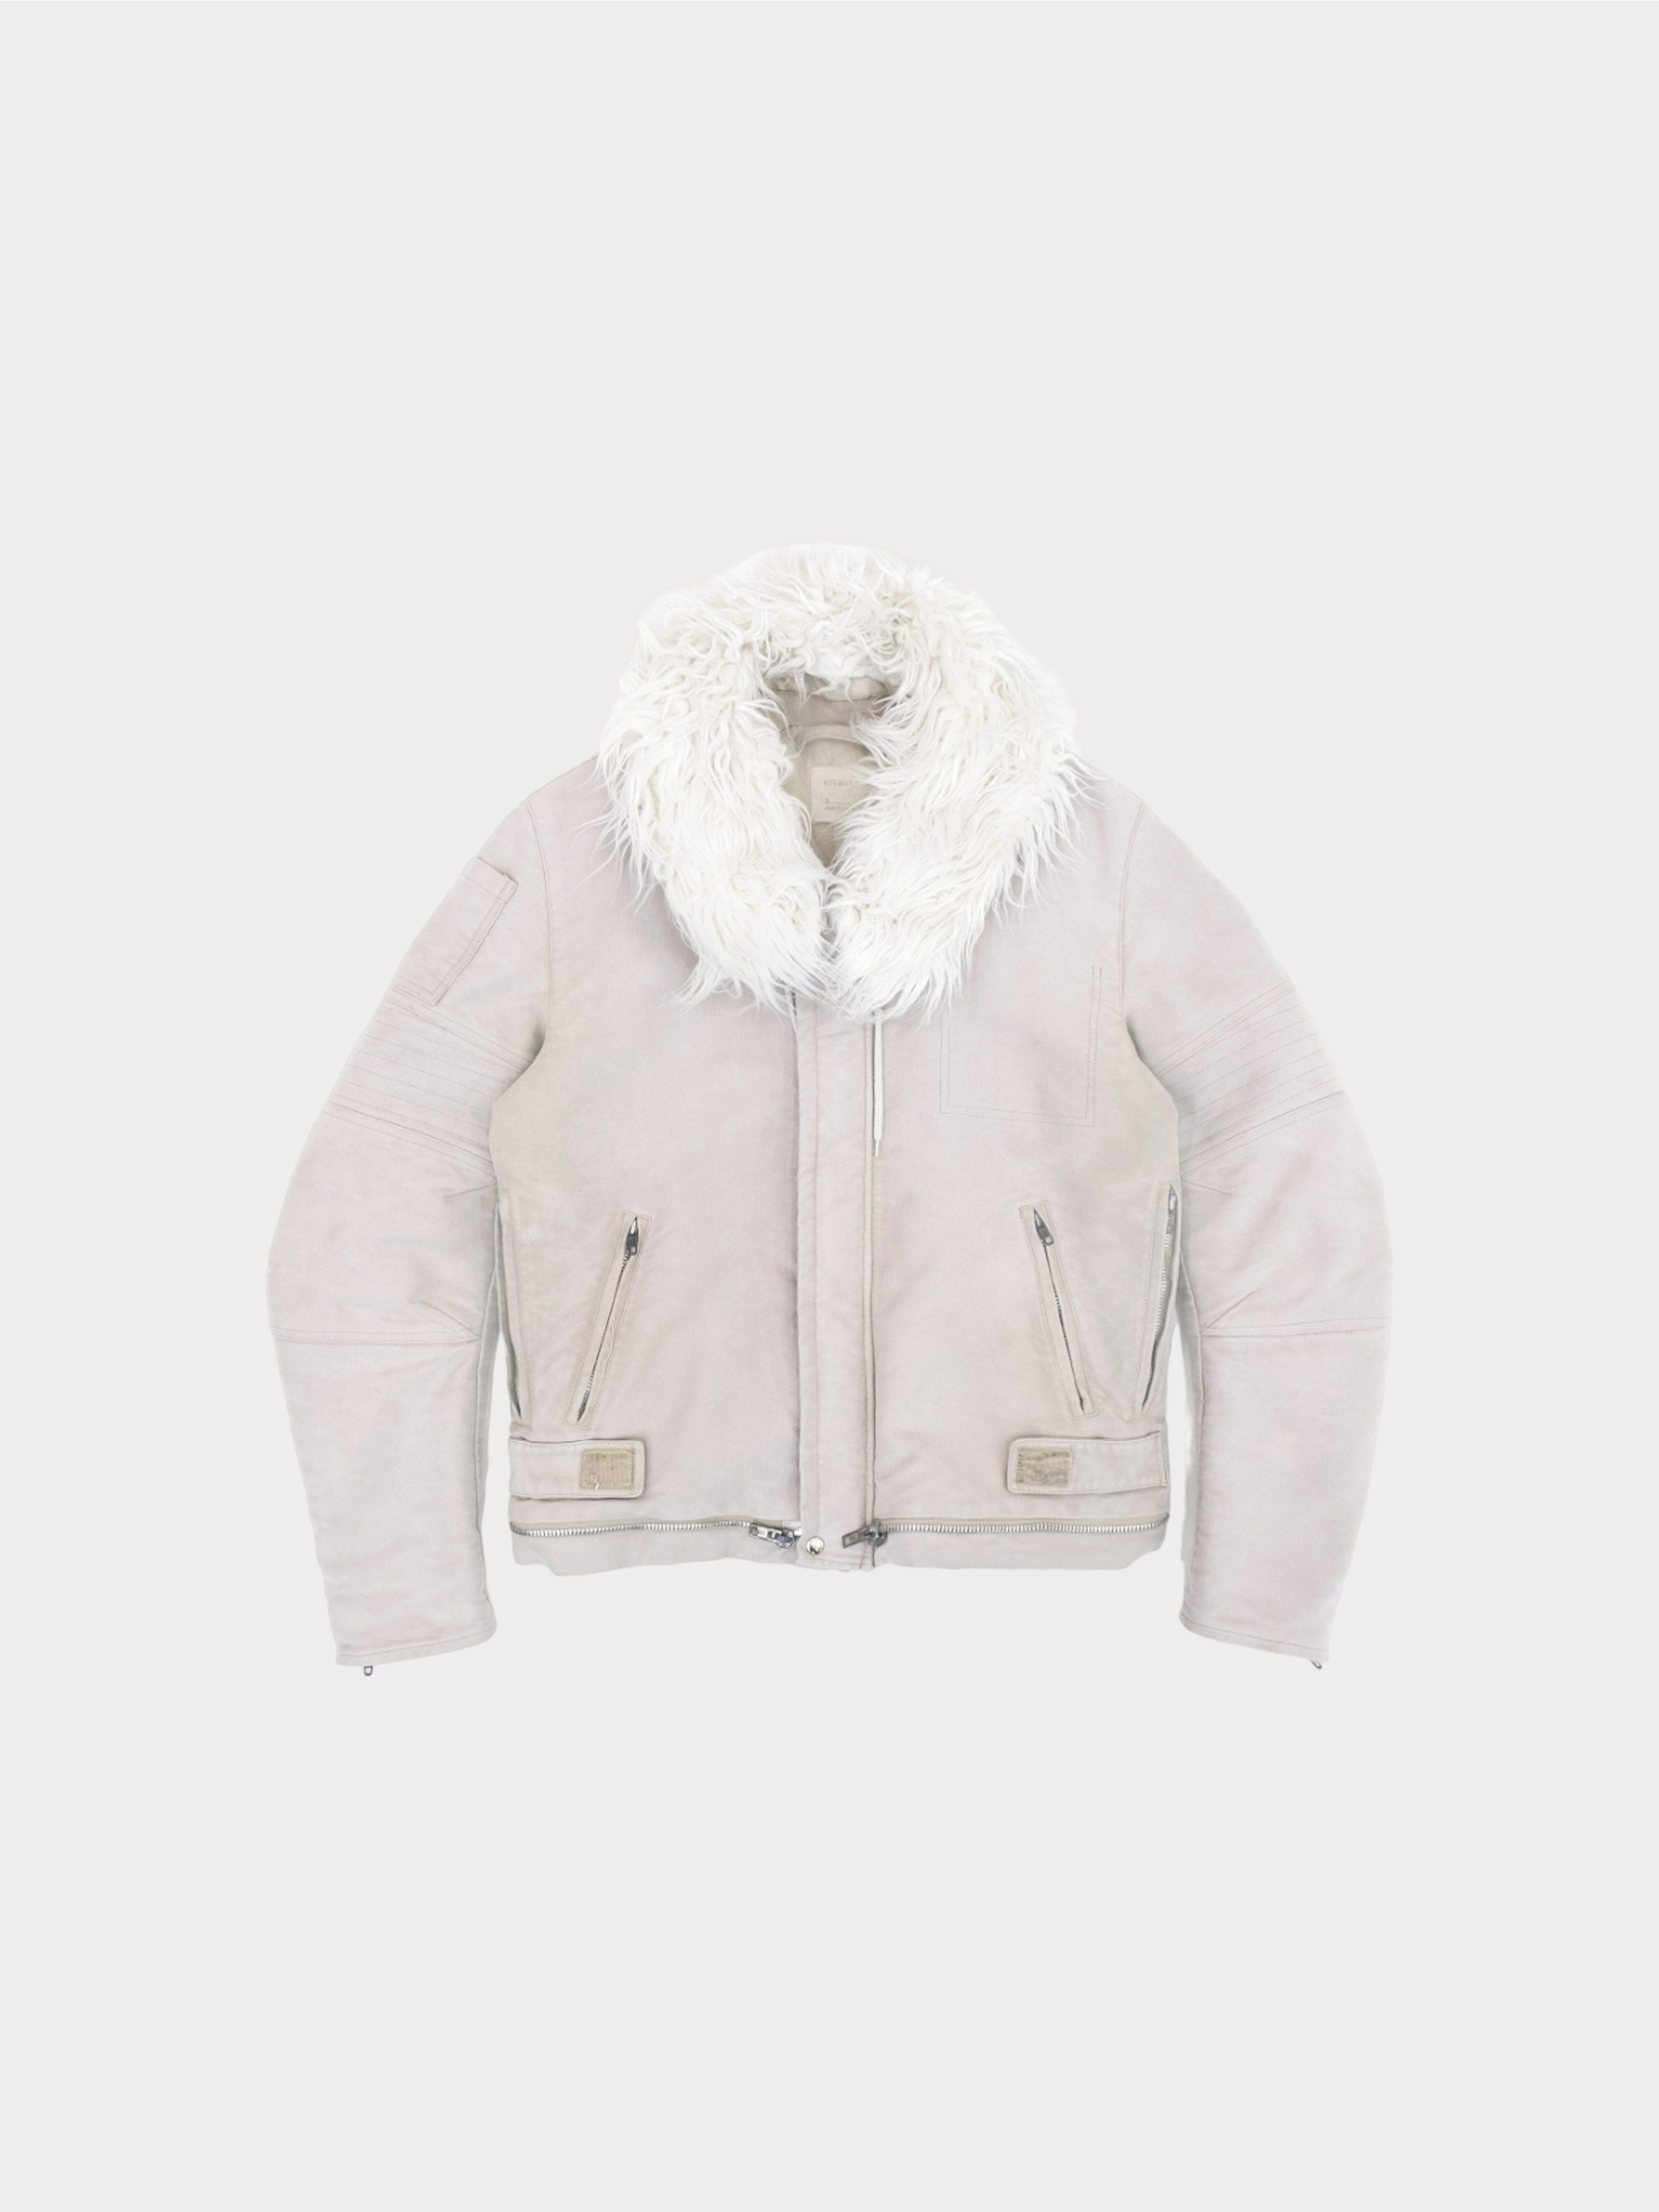 Helmut Lang AW 1999 Astro Biker Jacket with Faux Fur Collar